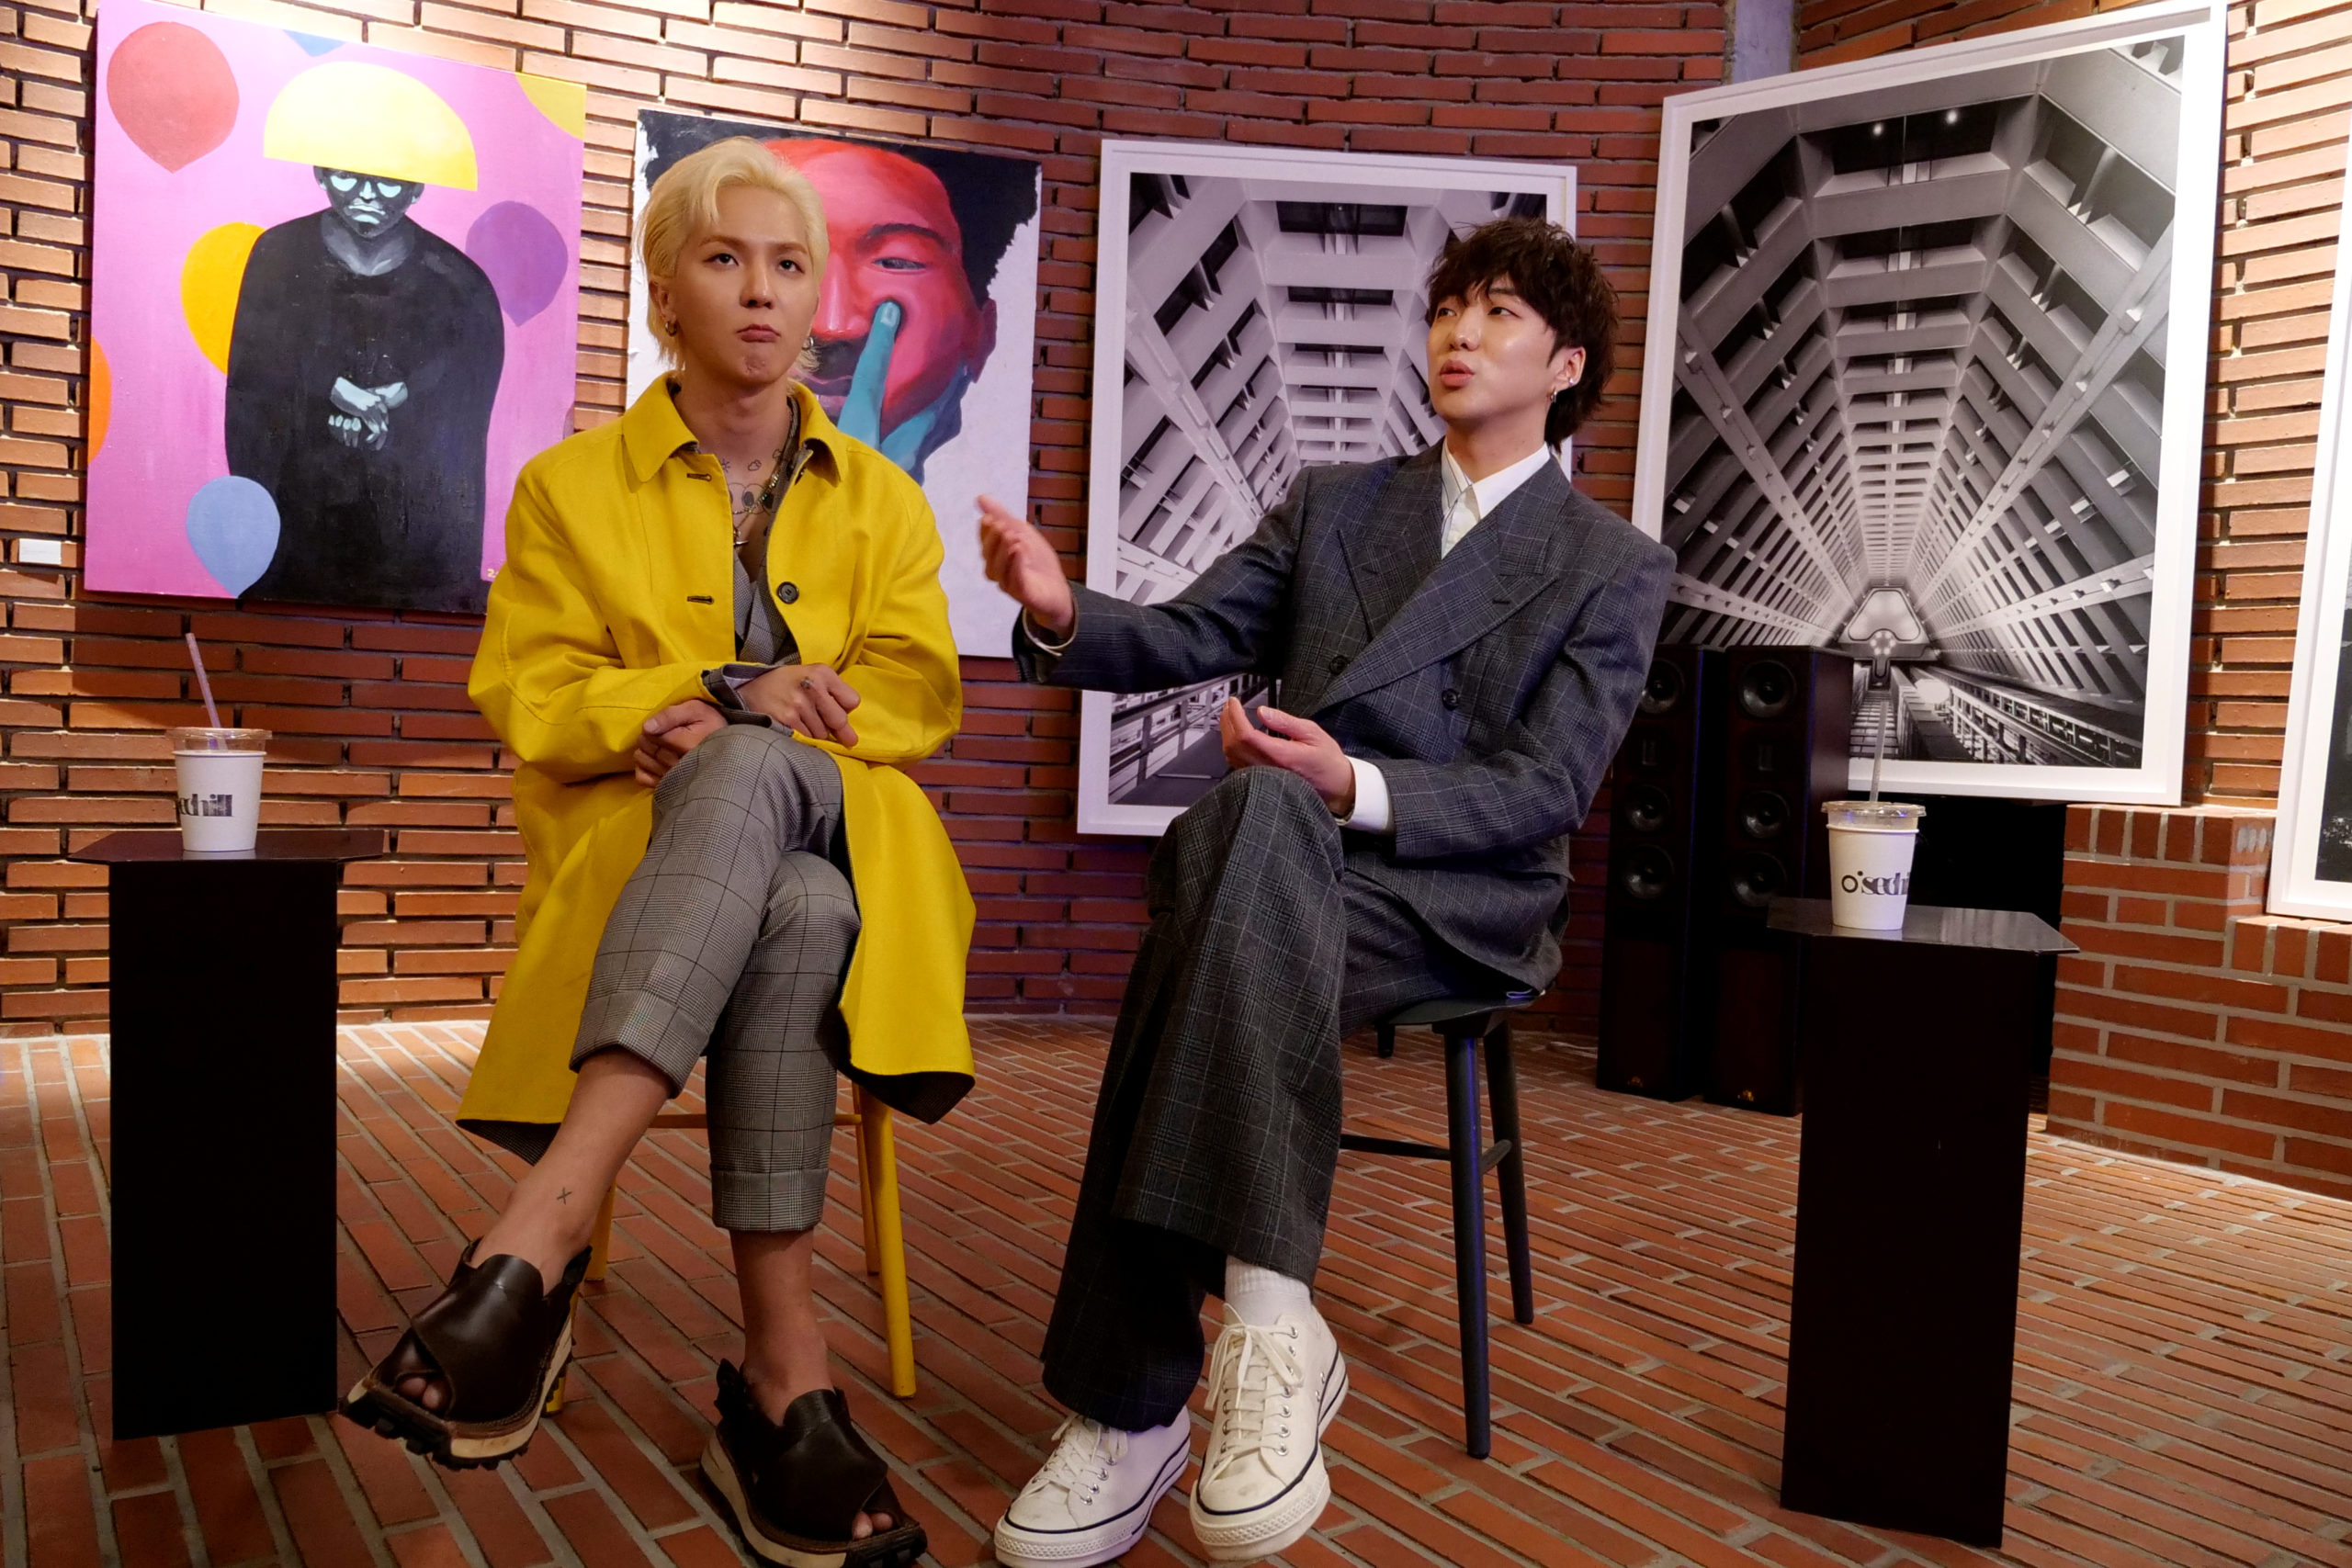 MINO and KANG SEUNG YOON attend an interview with Reuters at a cafe in Seoul, South Korea March 31, 2021. REUTERS/Daewoung Kim